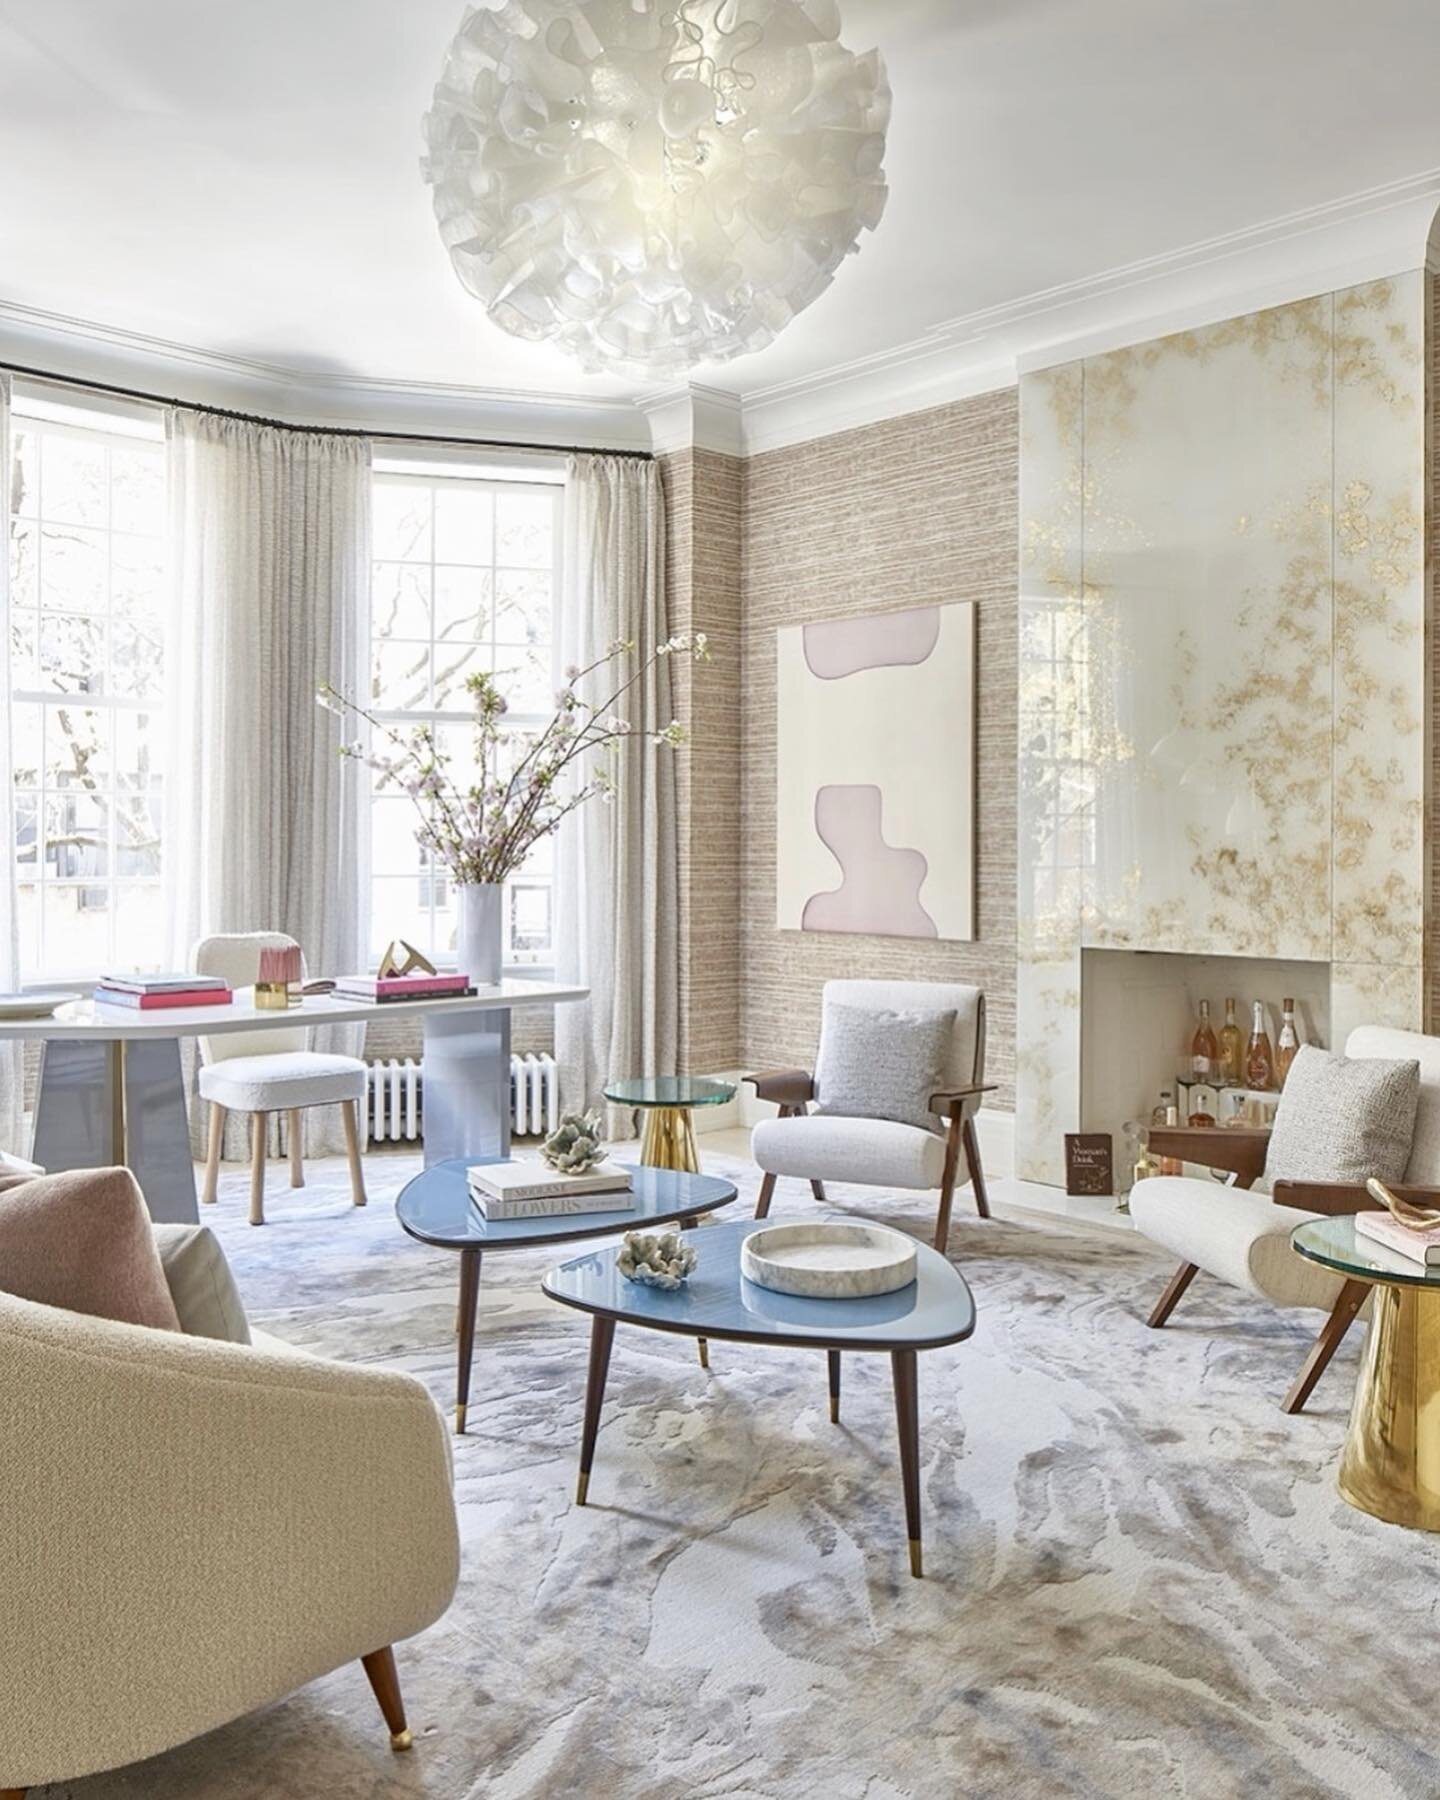 As we gear up for this years Kips Bay Show House, let&rsquo;s take a moment to revisit our installation of Eve Robinson&rsquo;s stunning display from 2019. @everobinsonassociates 📸: @marcoriccastudio 
#kipsbayshowhouse #interiordesign